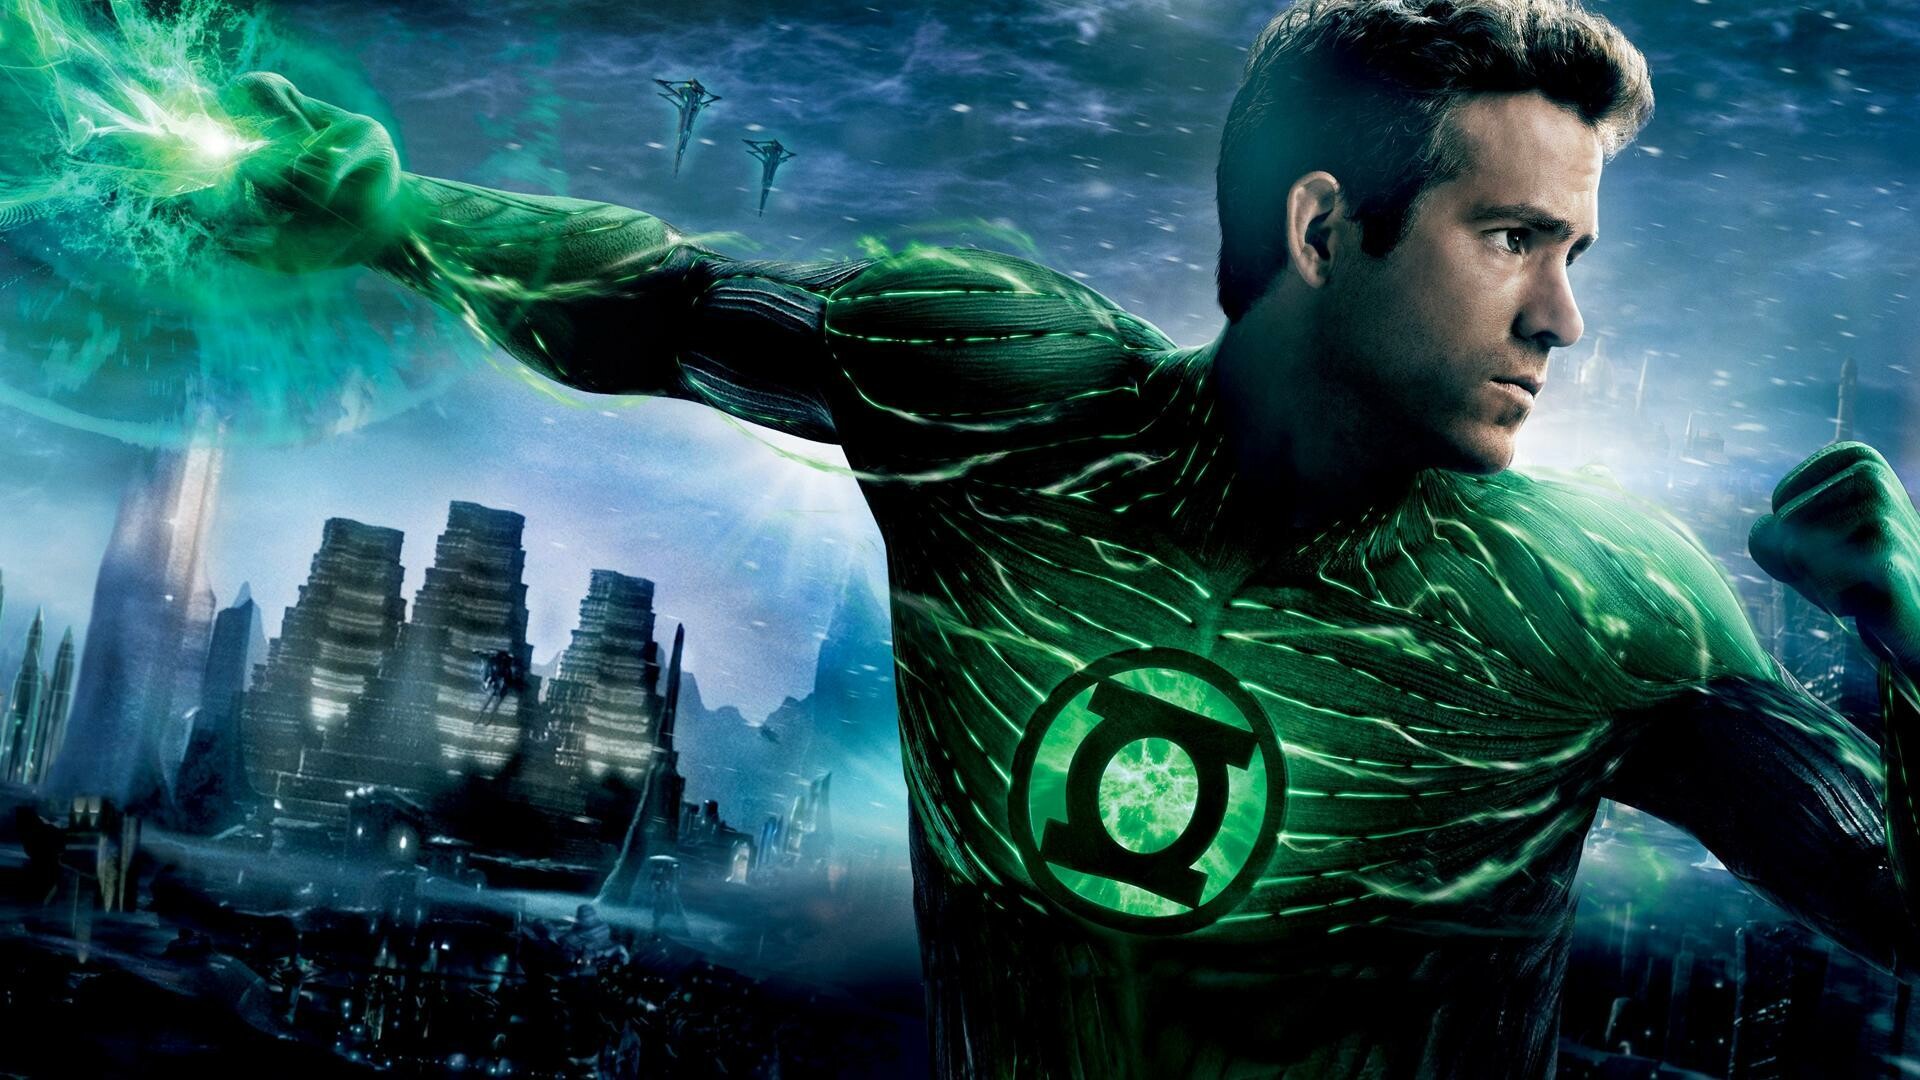 Green Lantern: Ryan Reynolds, A member of the Justice League of America. 1920x1080 Full HD Background.